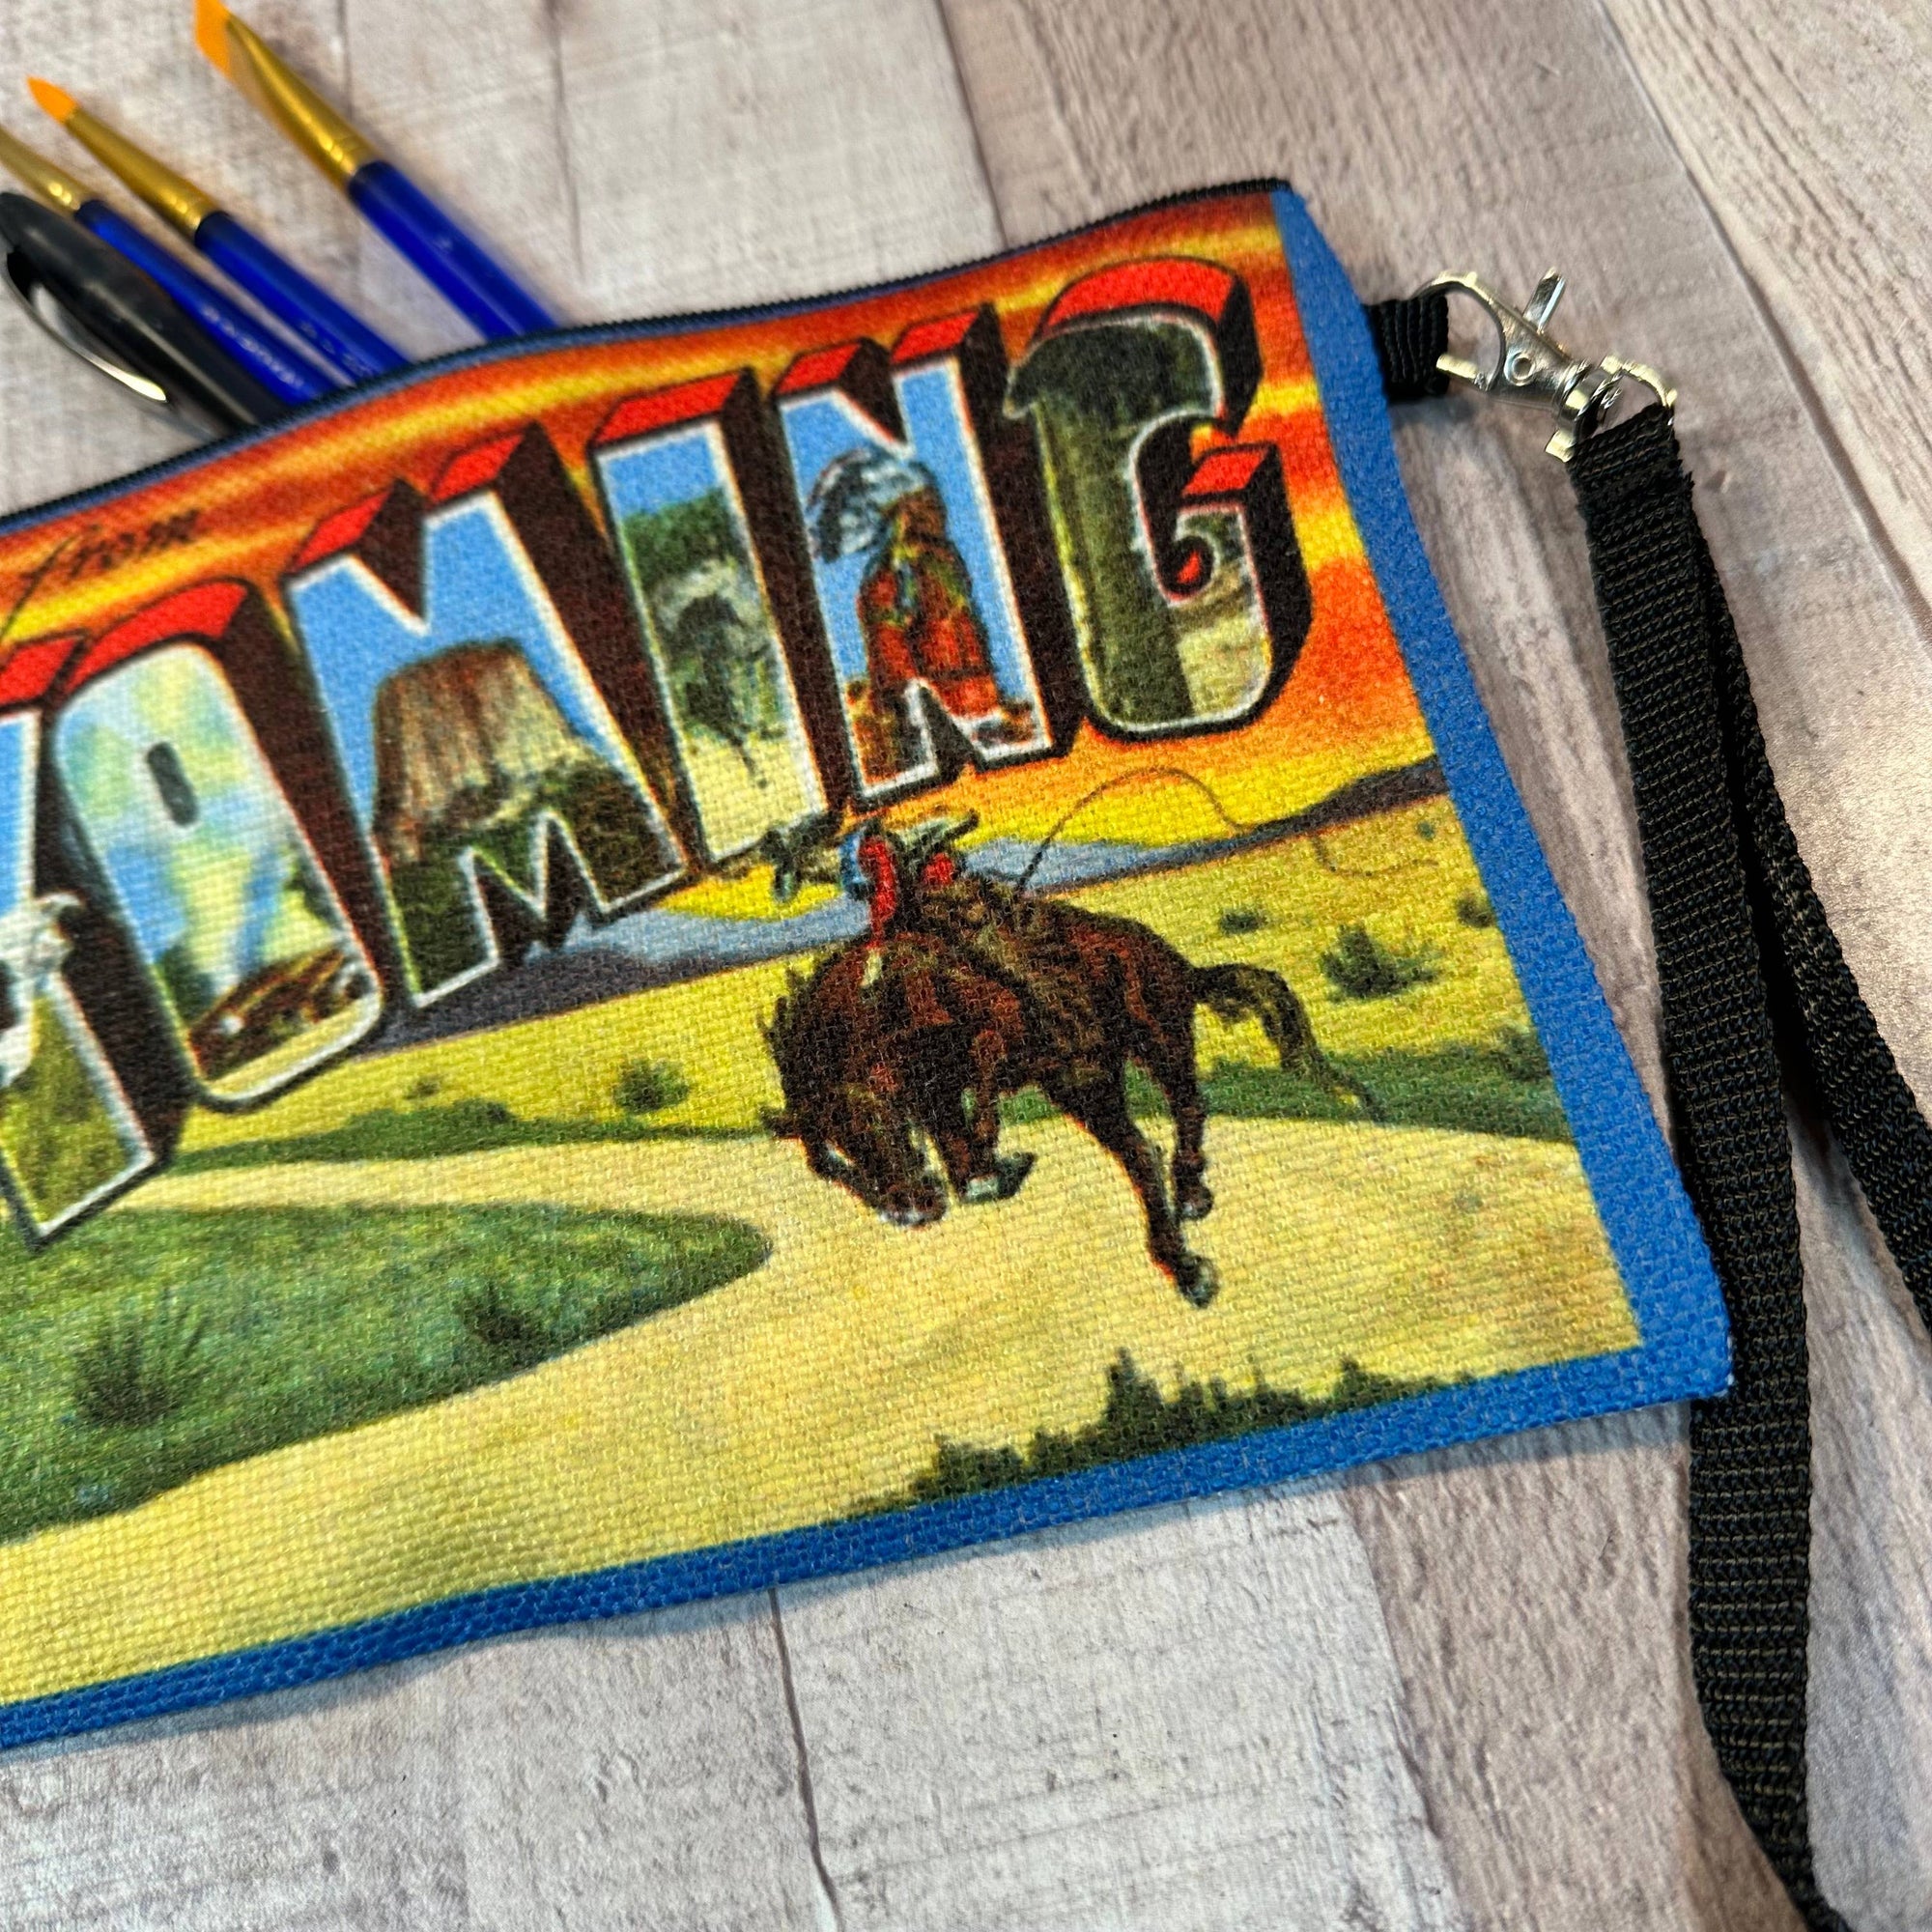 Greetings from Wyoming  linen bag with wristlet strap